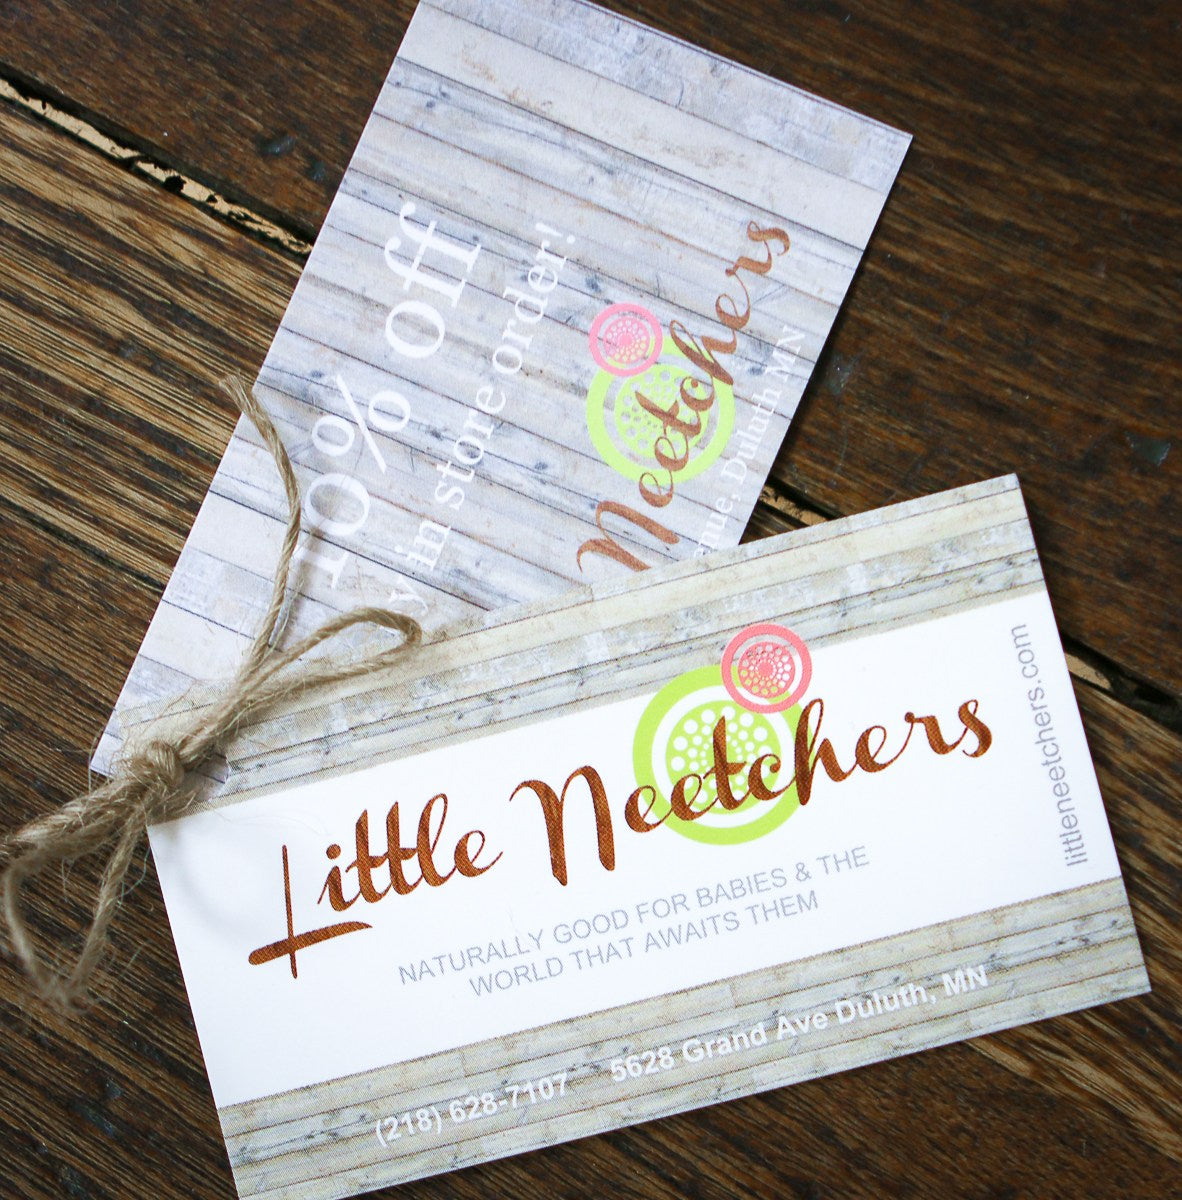 Countdown to Christmas: DLH & Little Neetchers